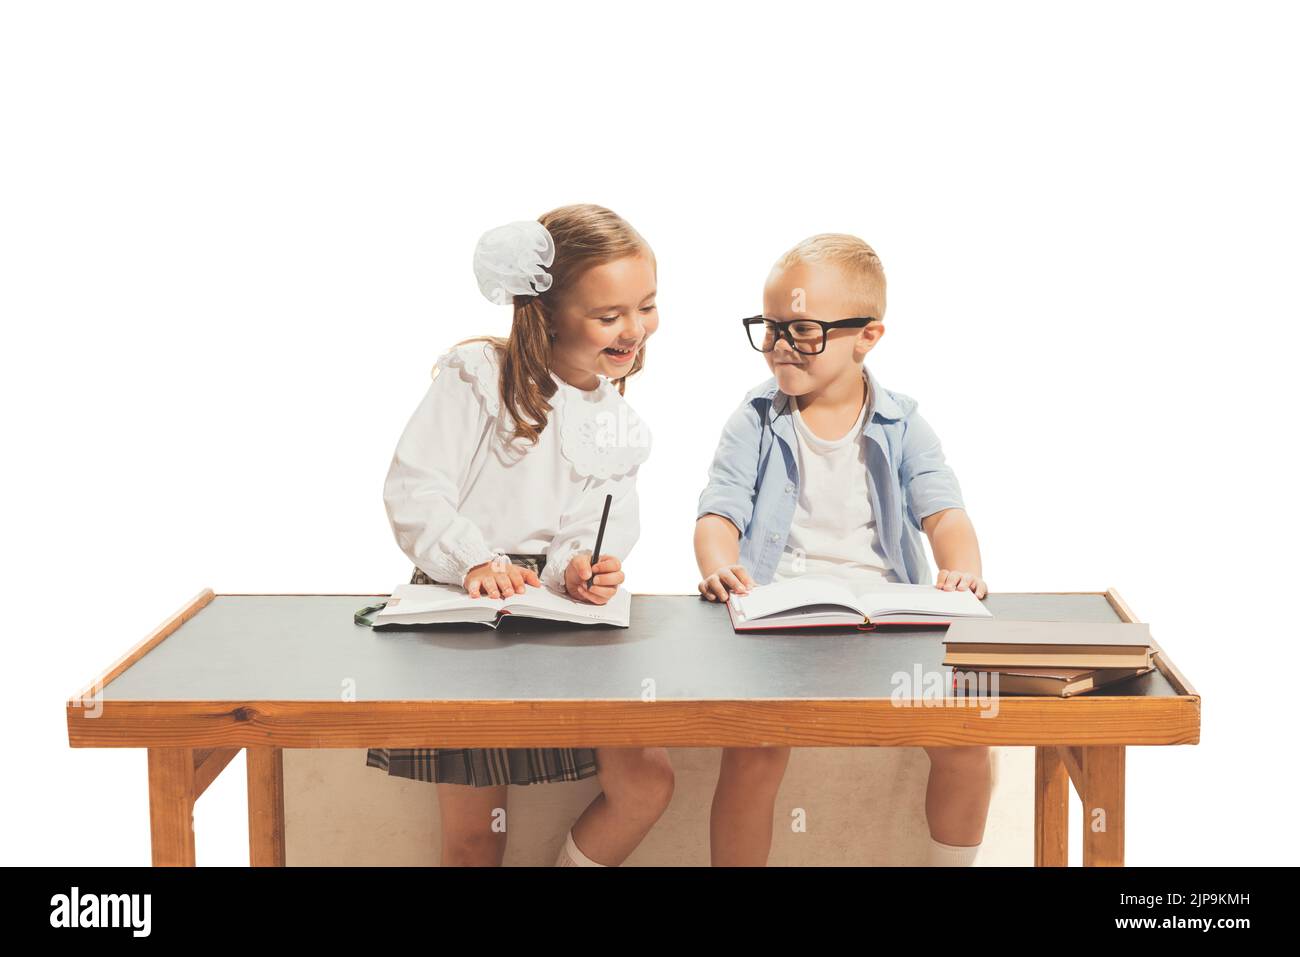 Portrait of little boy and girl, children sitting at desk and studying, doing homework isolated over white background Stock Photo